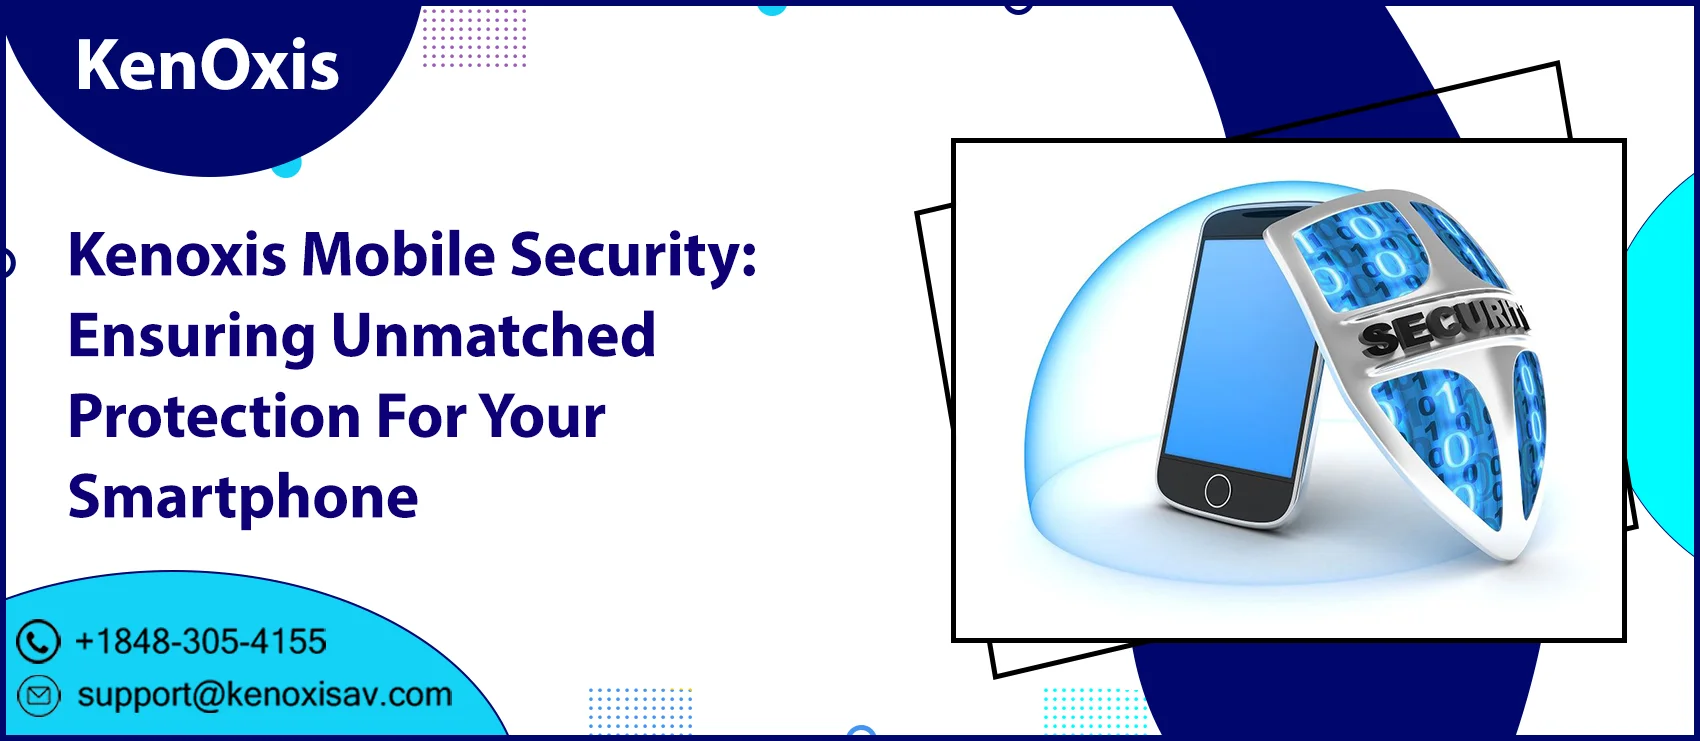 Kenoxis Mobile Security: Ensuring Unmatched Protection For Your Smartphone